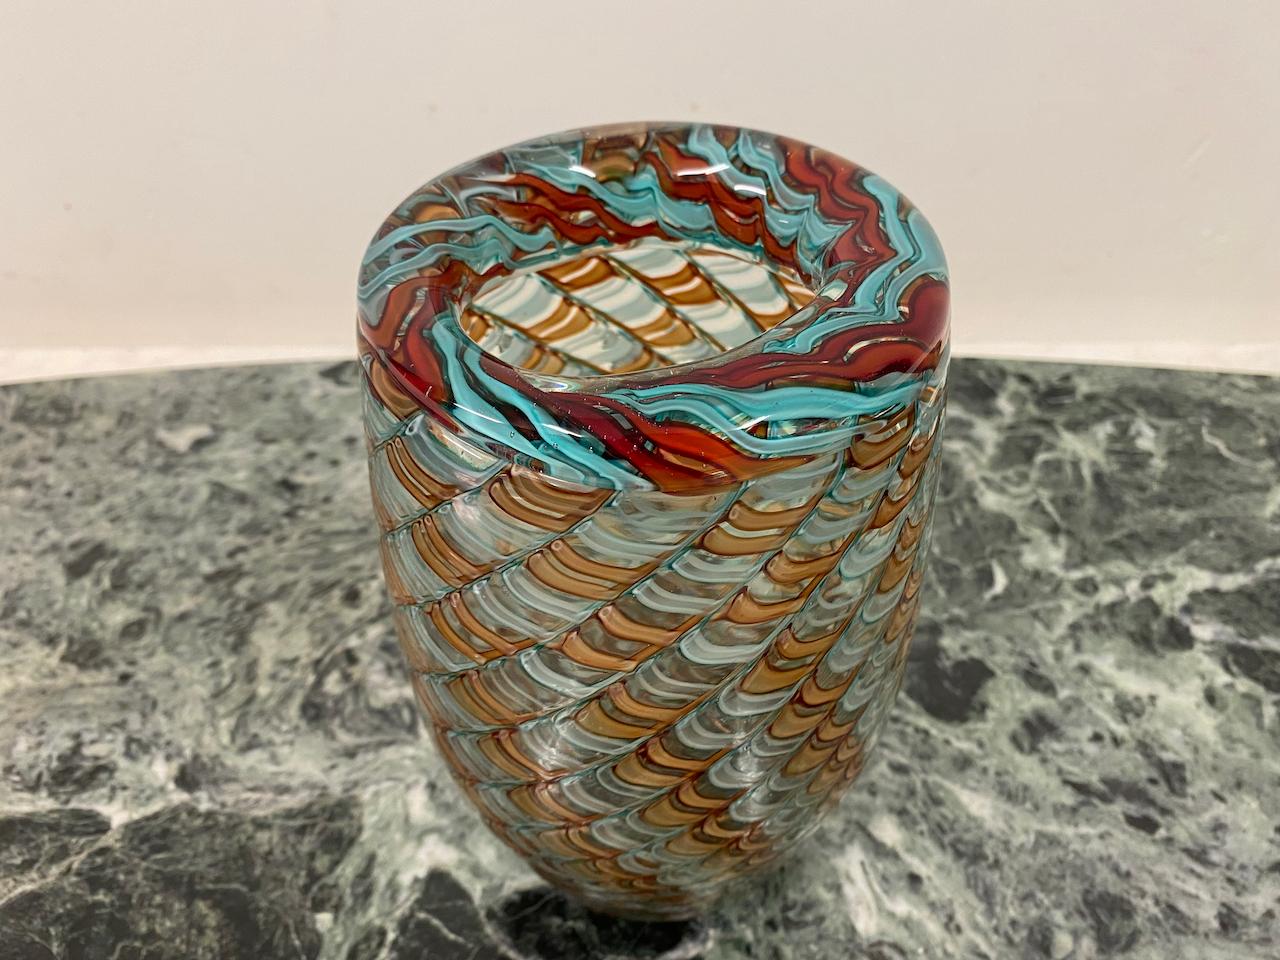 Murano Glass Vase by Stefano Toso 1